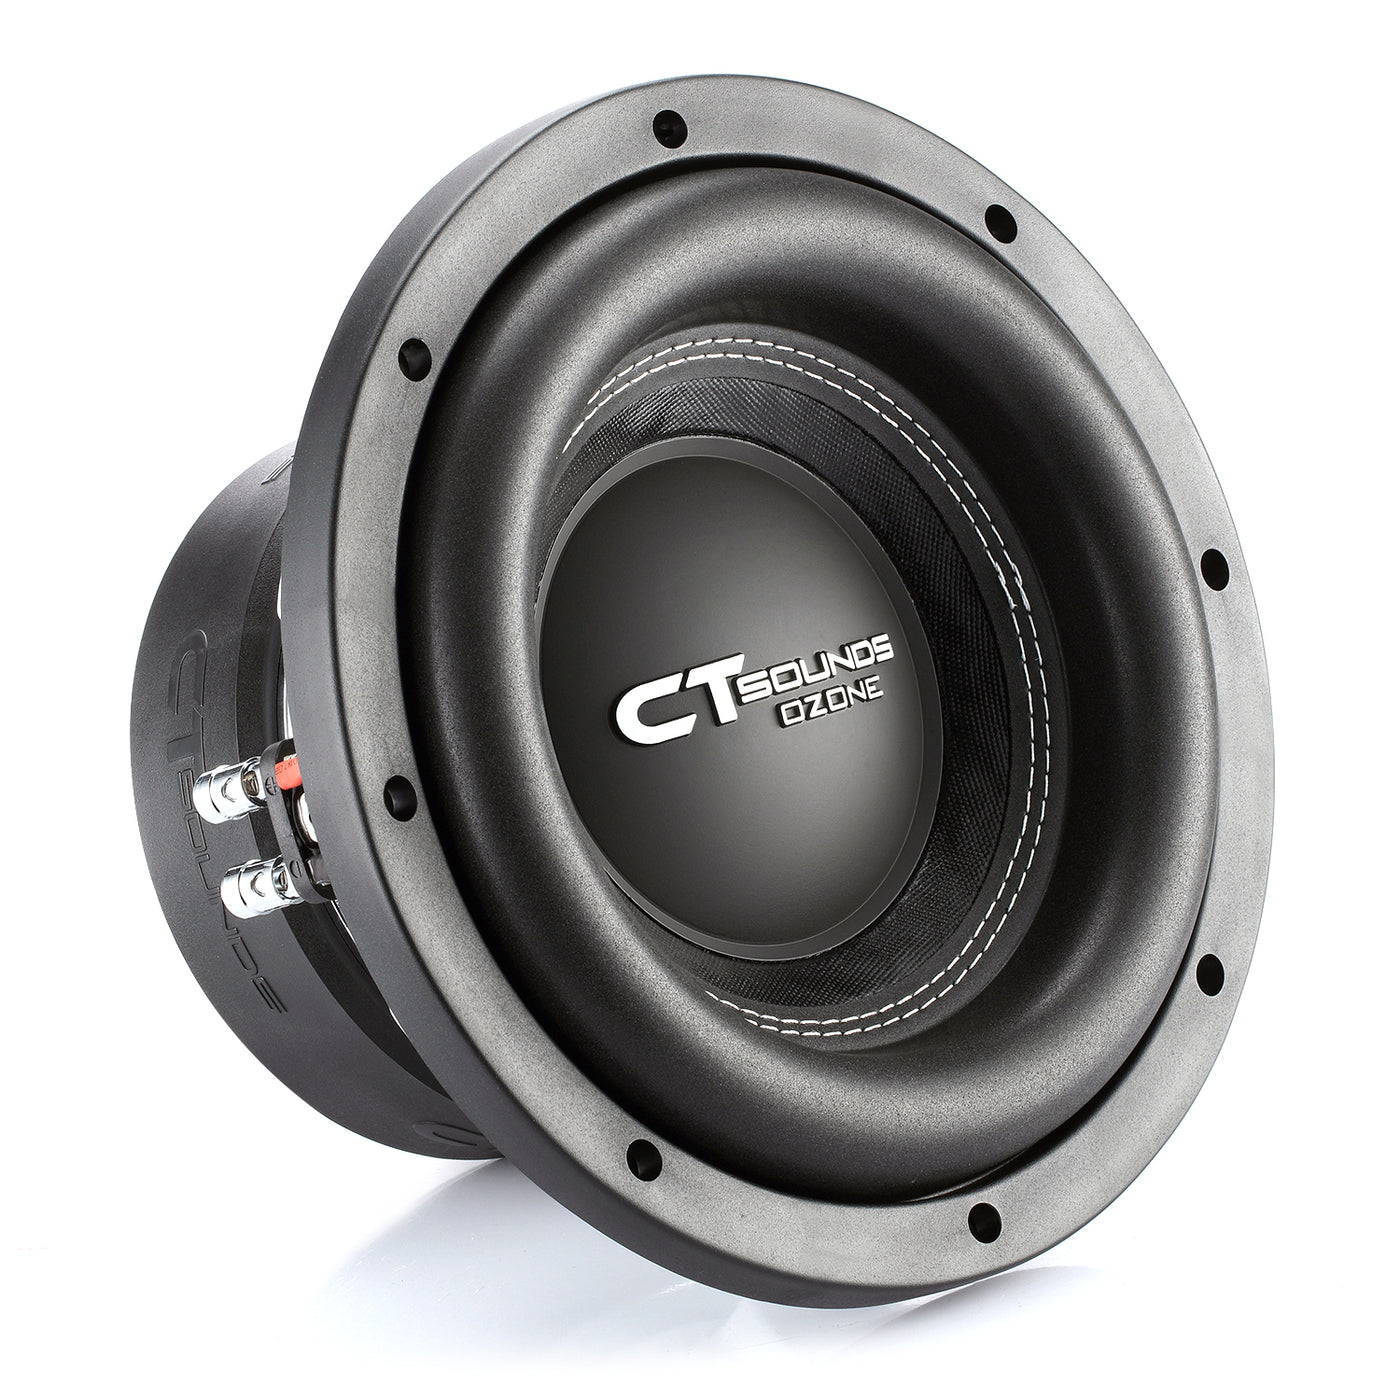 OZONE-10 // 800 Watts RMS 10 Inch SPL Car Subwoofer